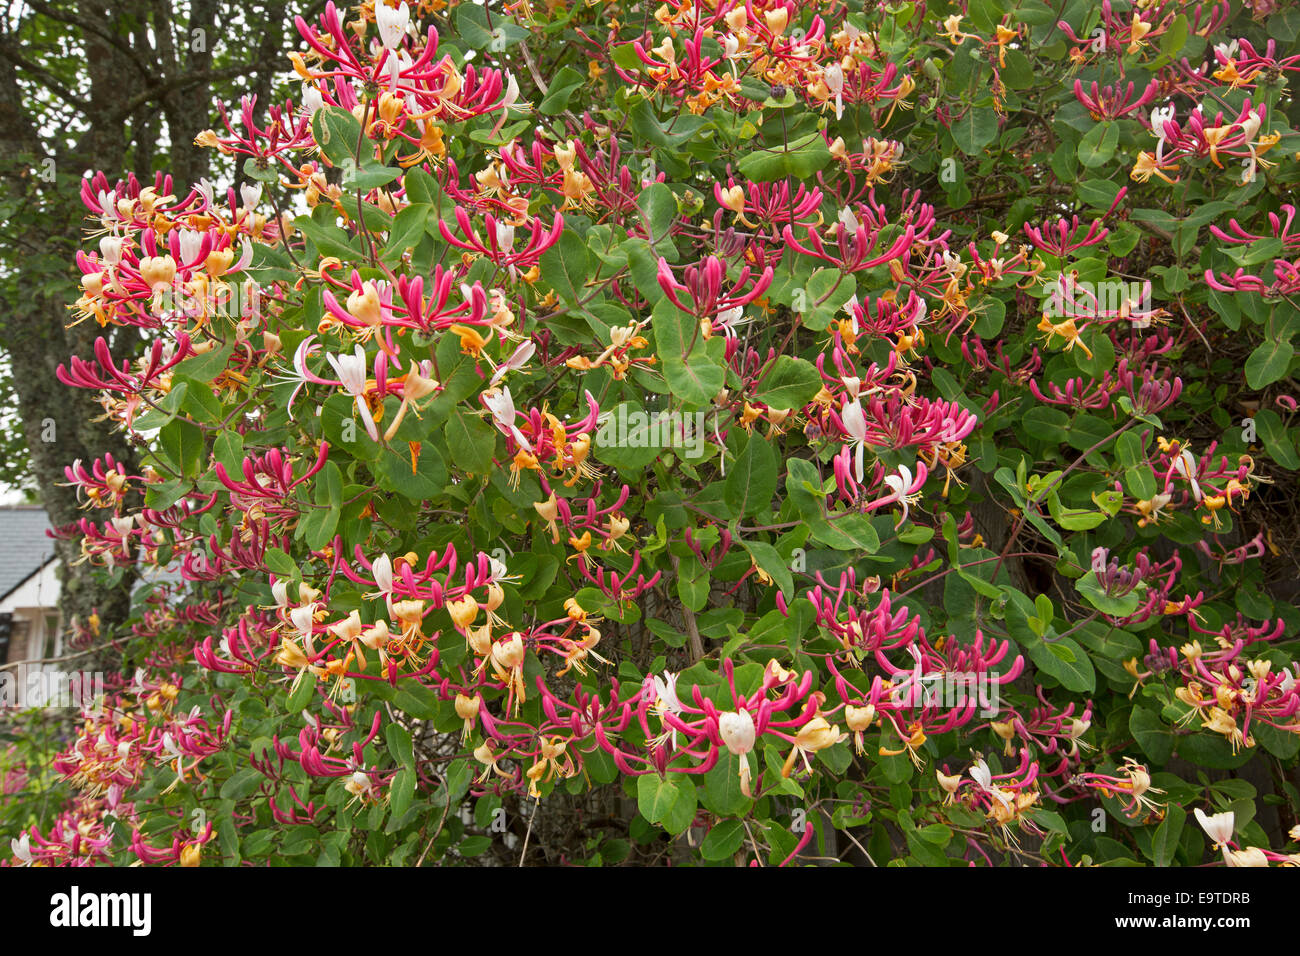 Cluster of beautiful red, yellow, and white honeysuckle flowers and emerald green foliage of Lonicera periclymenum Stock Photo